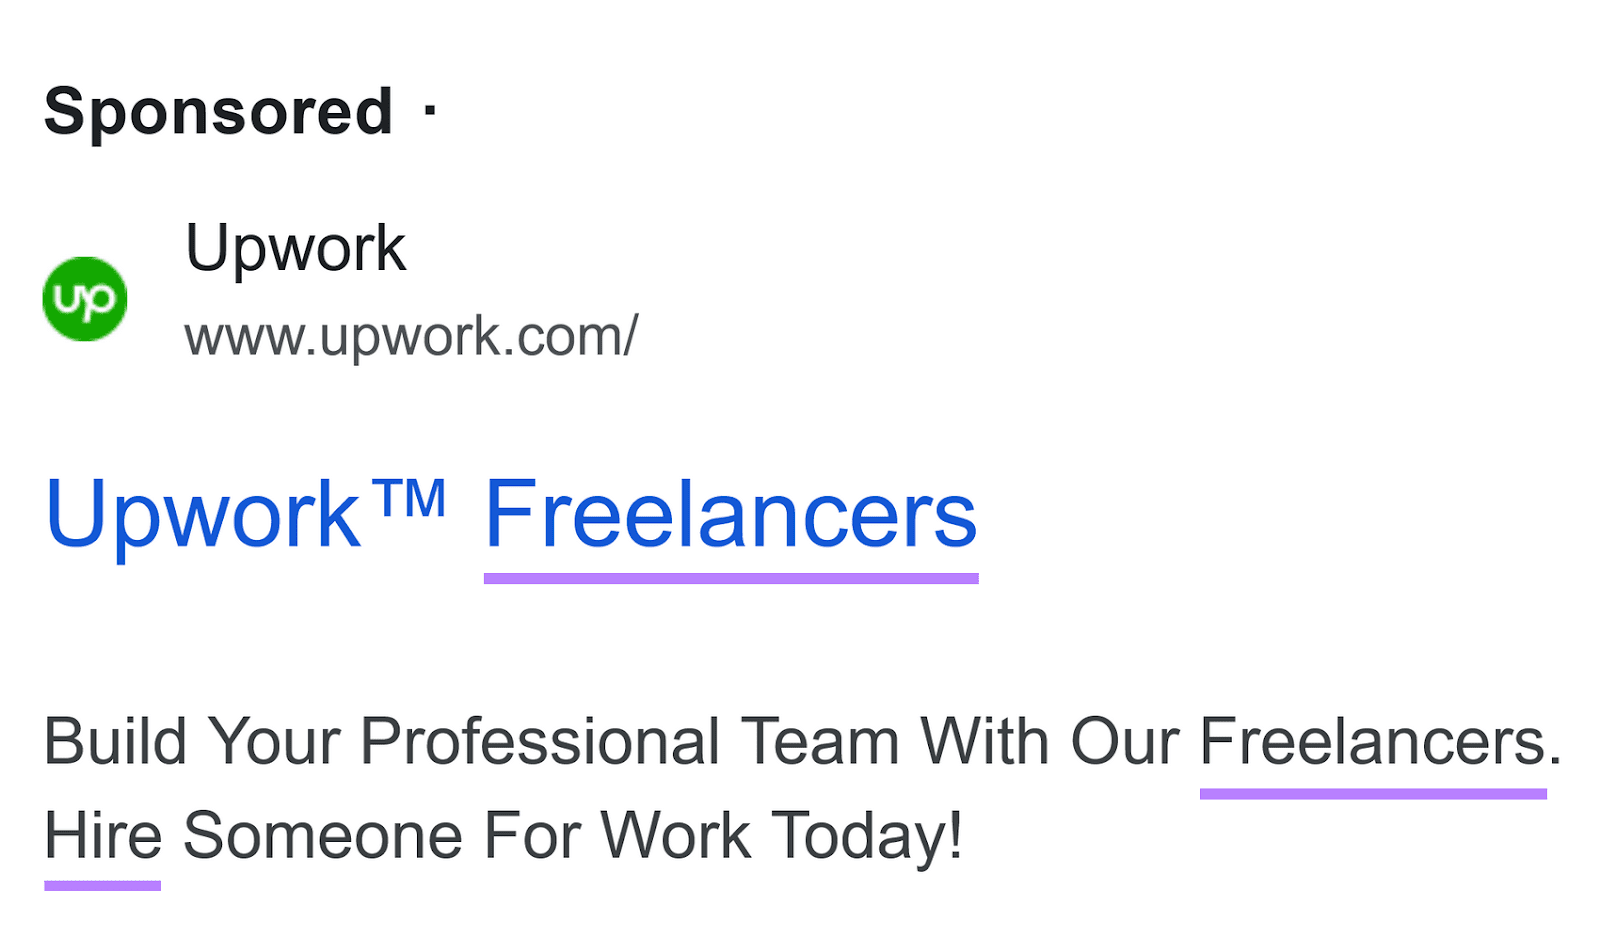 An ad from Upwork, with "hire," and "freelancers" keywords highlighted